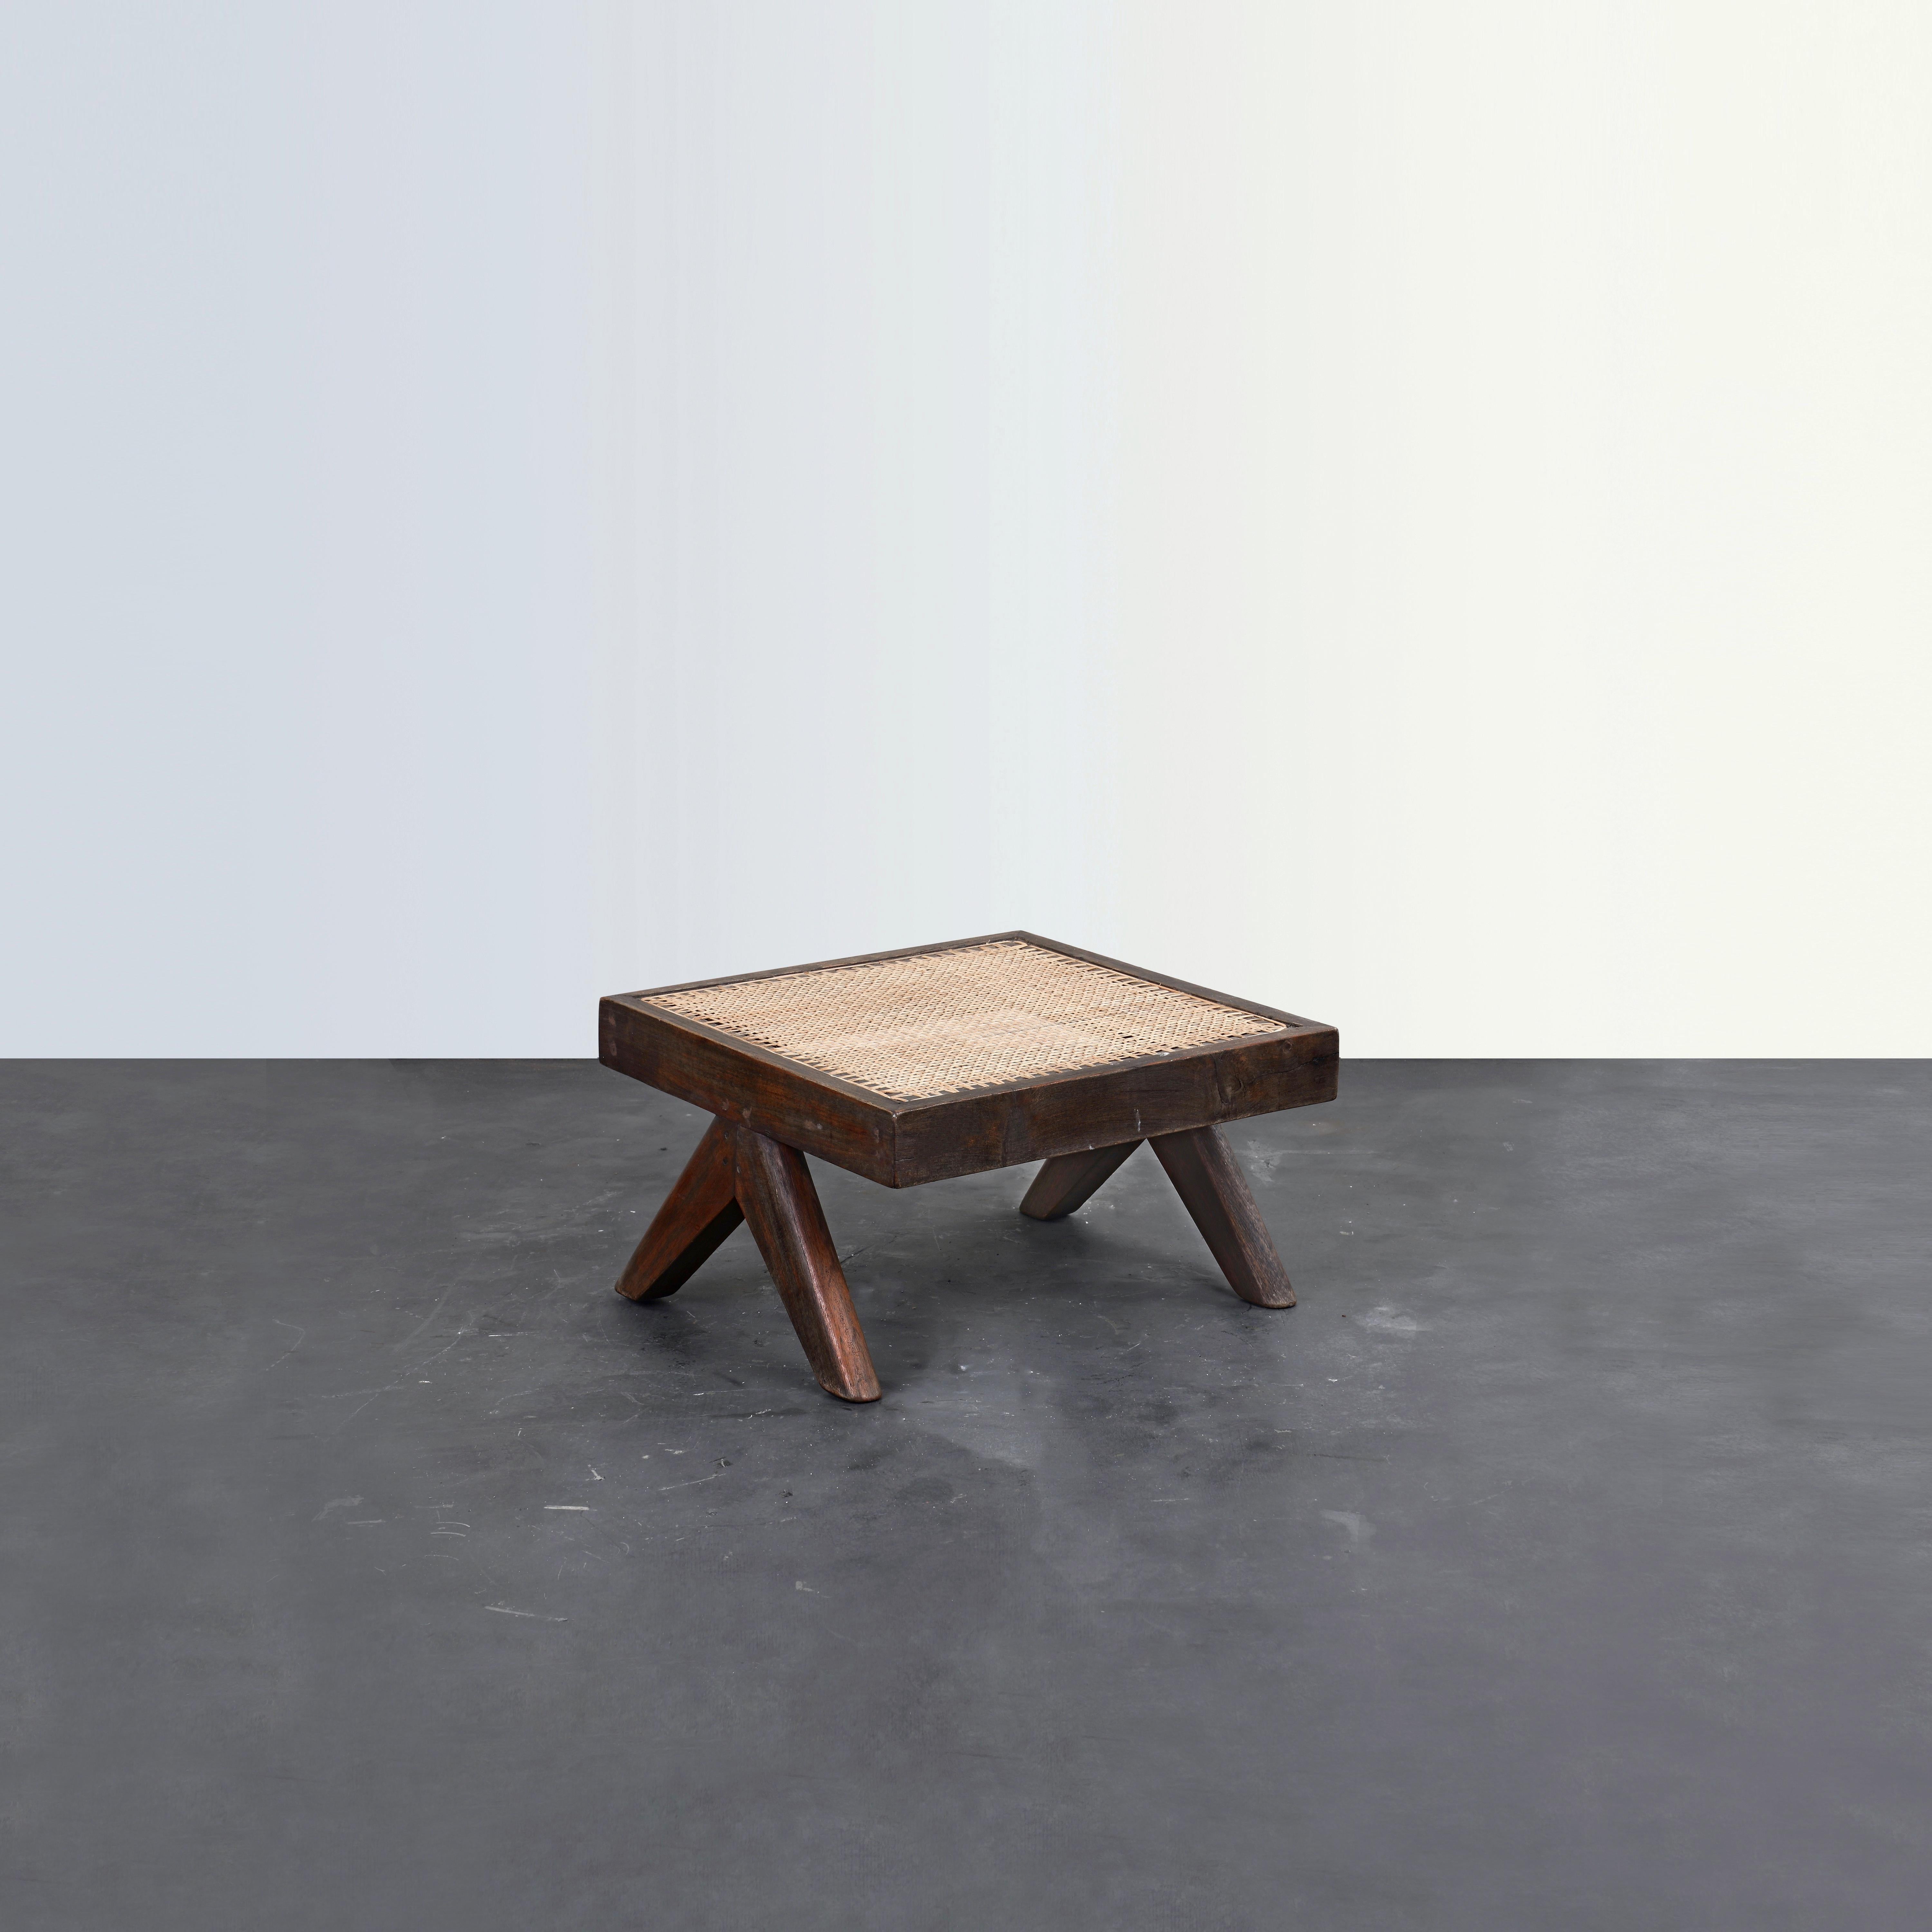 This stool is a fantastic and iconic. This is a true rarity and extremely valuable. It appears so simple and yet so precise, where proportions seem to be perfect. Its patinated teak gives that objects a strong character, showing all that traces of